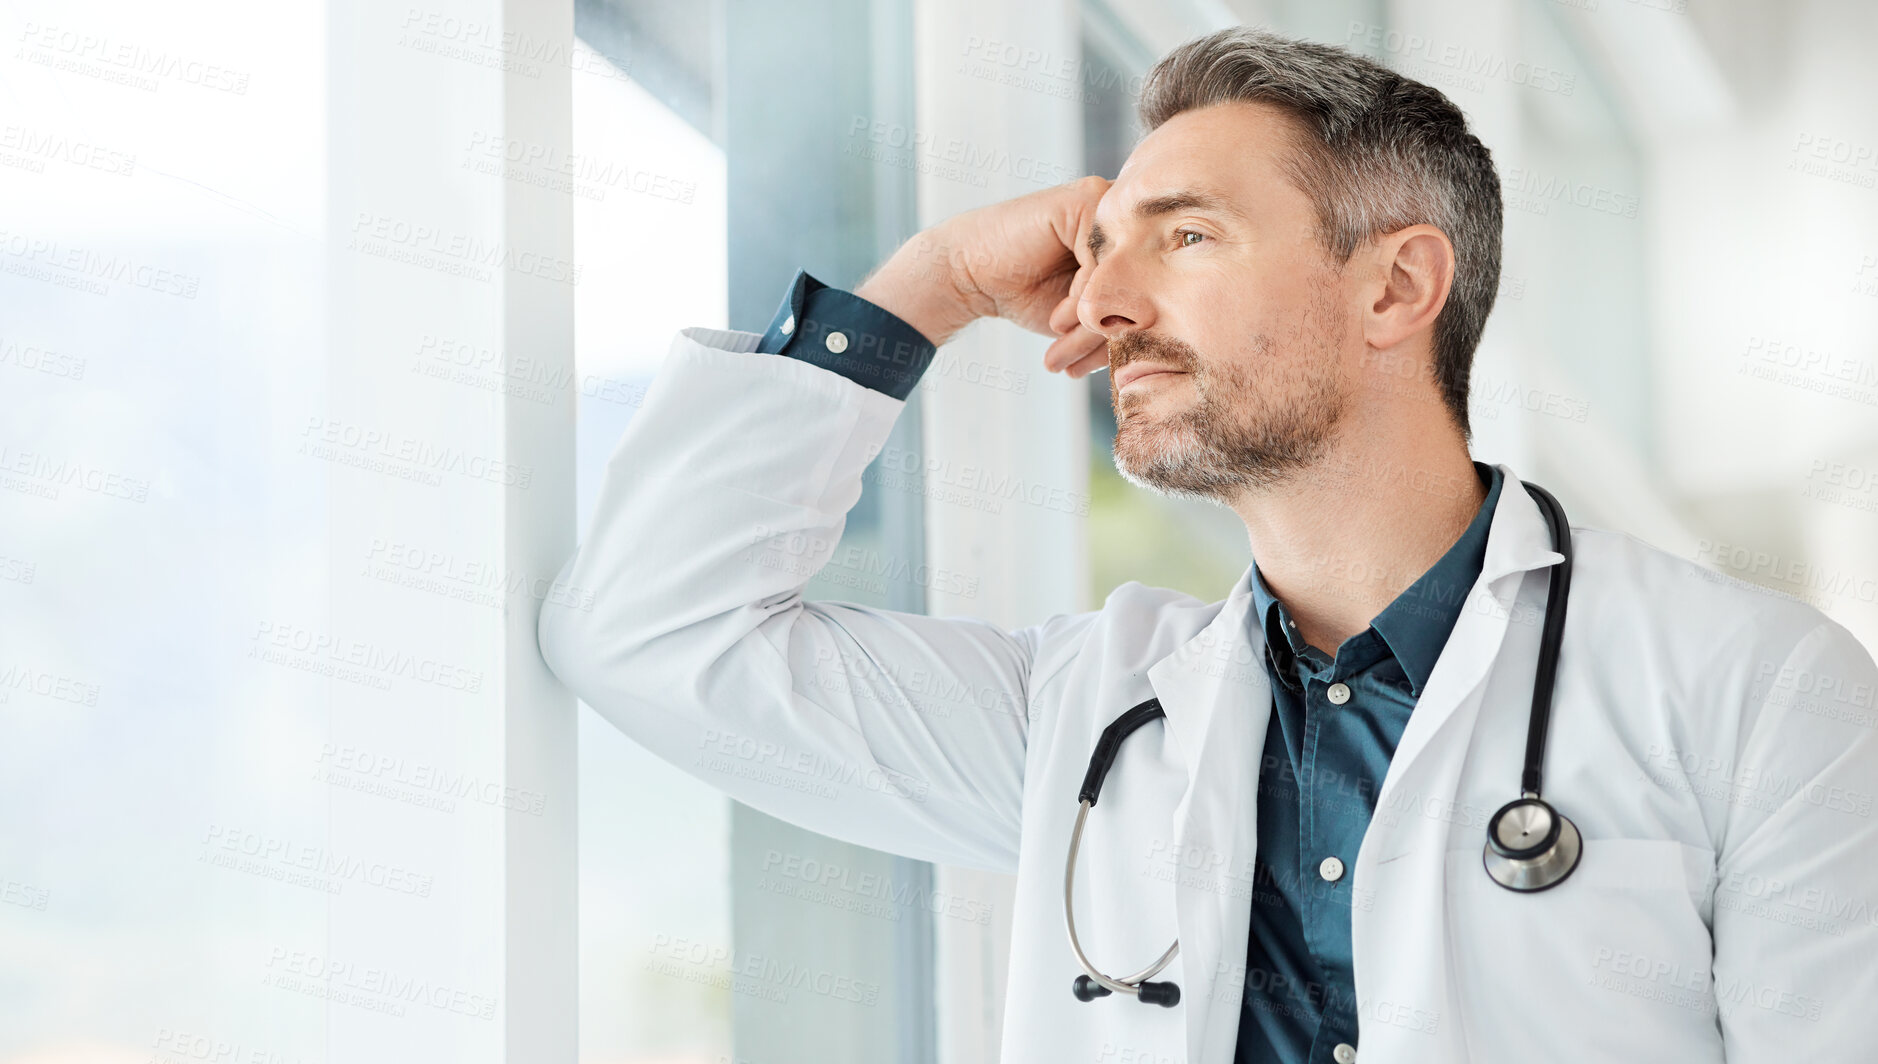 Buy stock photo Shot of a male doctor having a stressful day at work